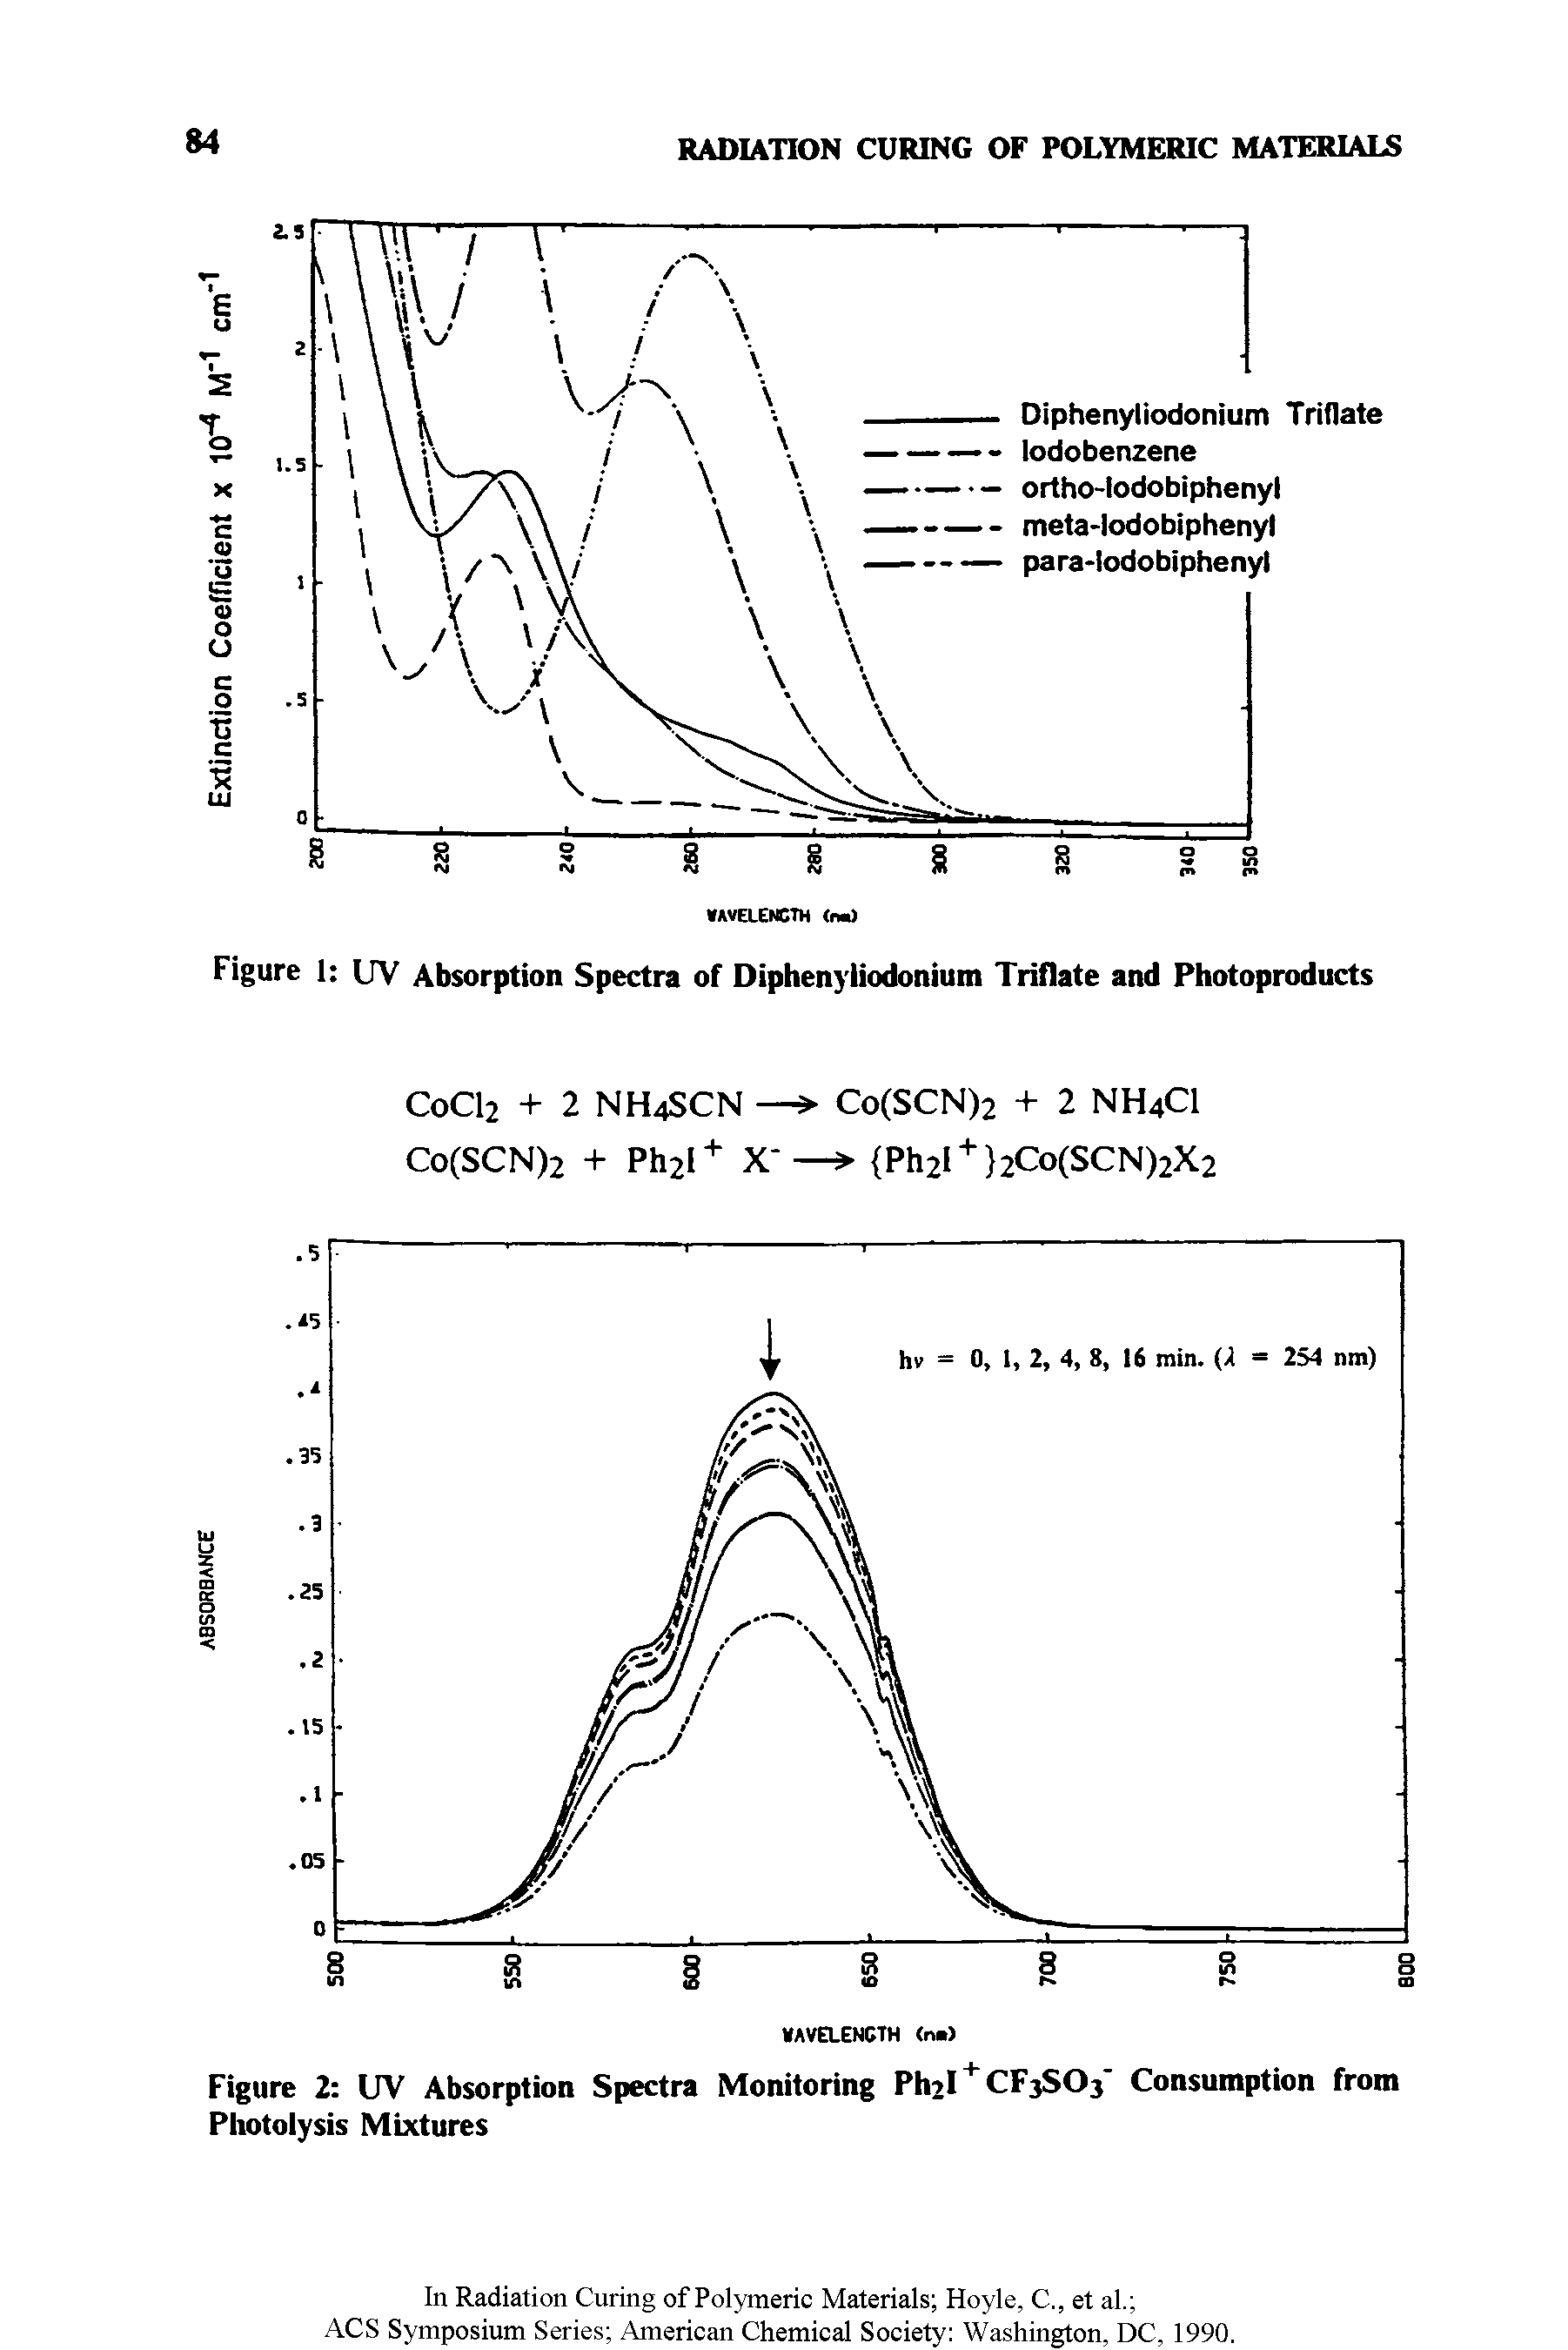 Figure 1 UV Absorption Spectra of Diphenyliodonium Triflate and Photoproducts...